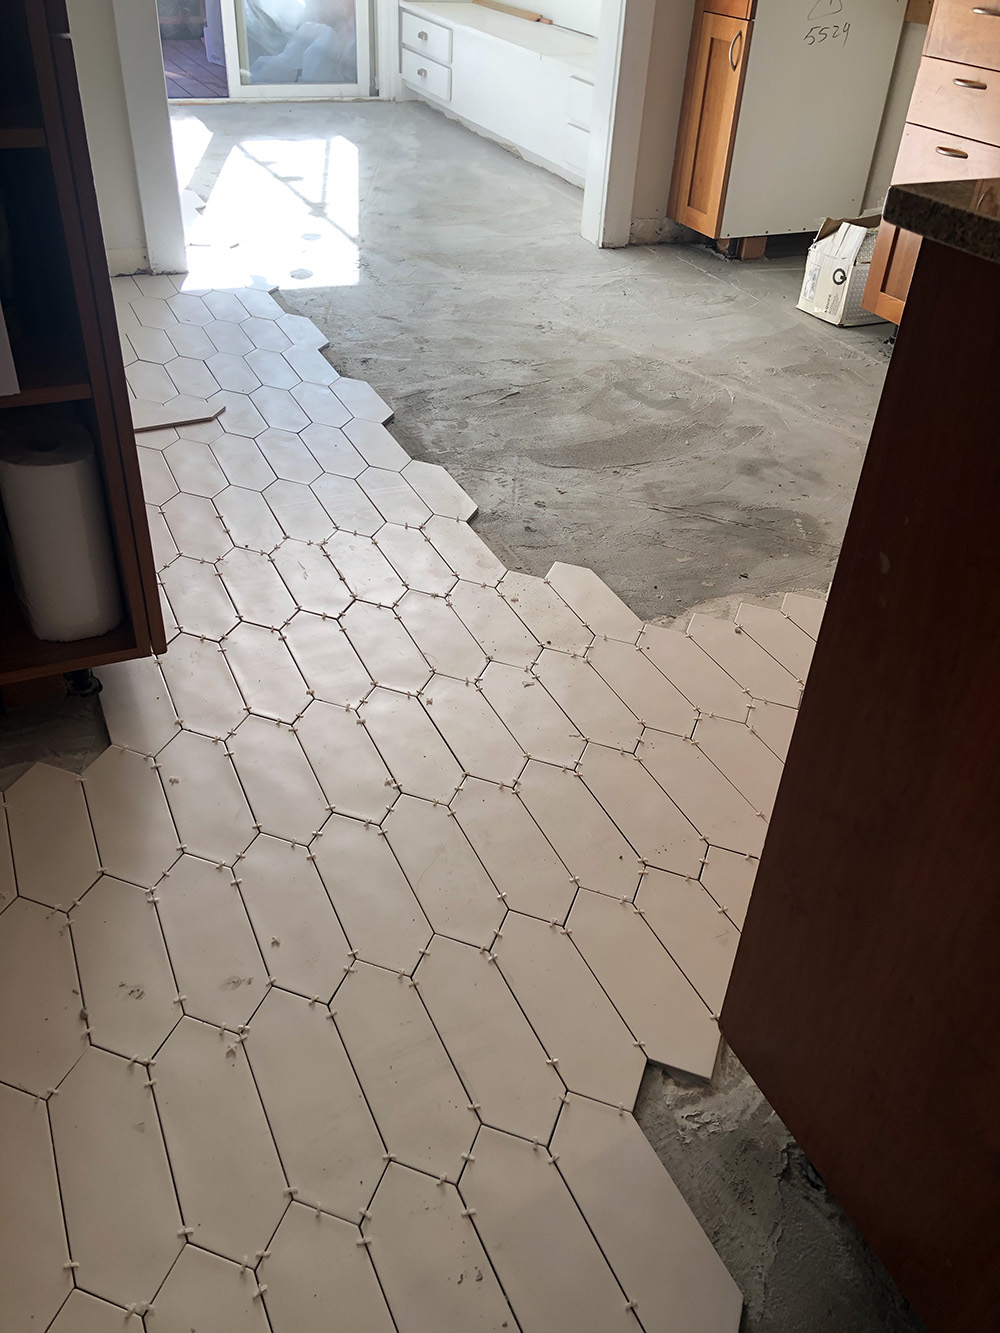 A kitchen floor with white picket tiles being installed.